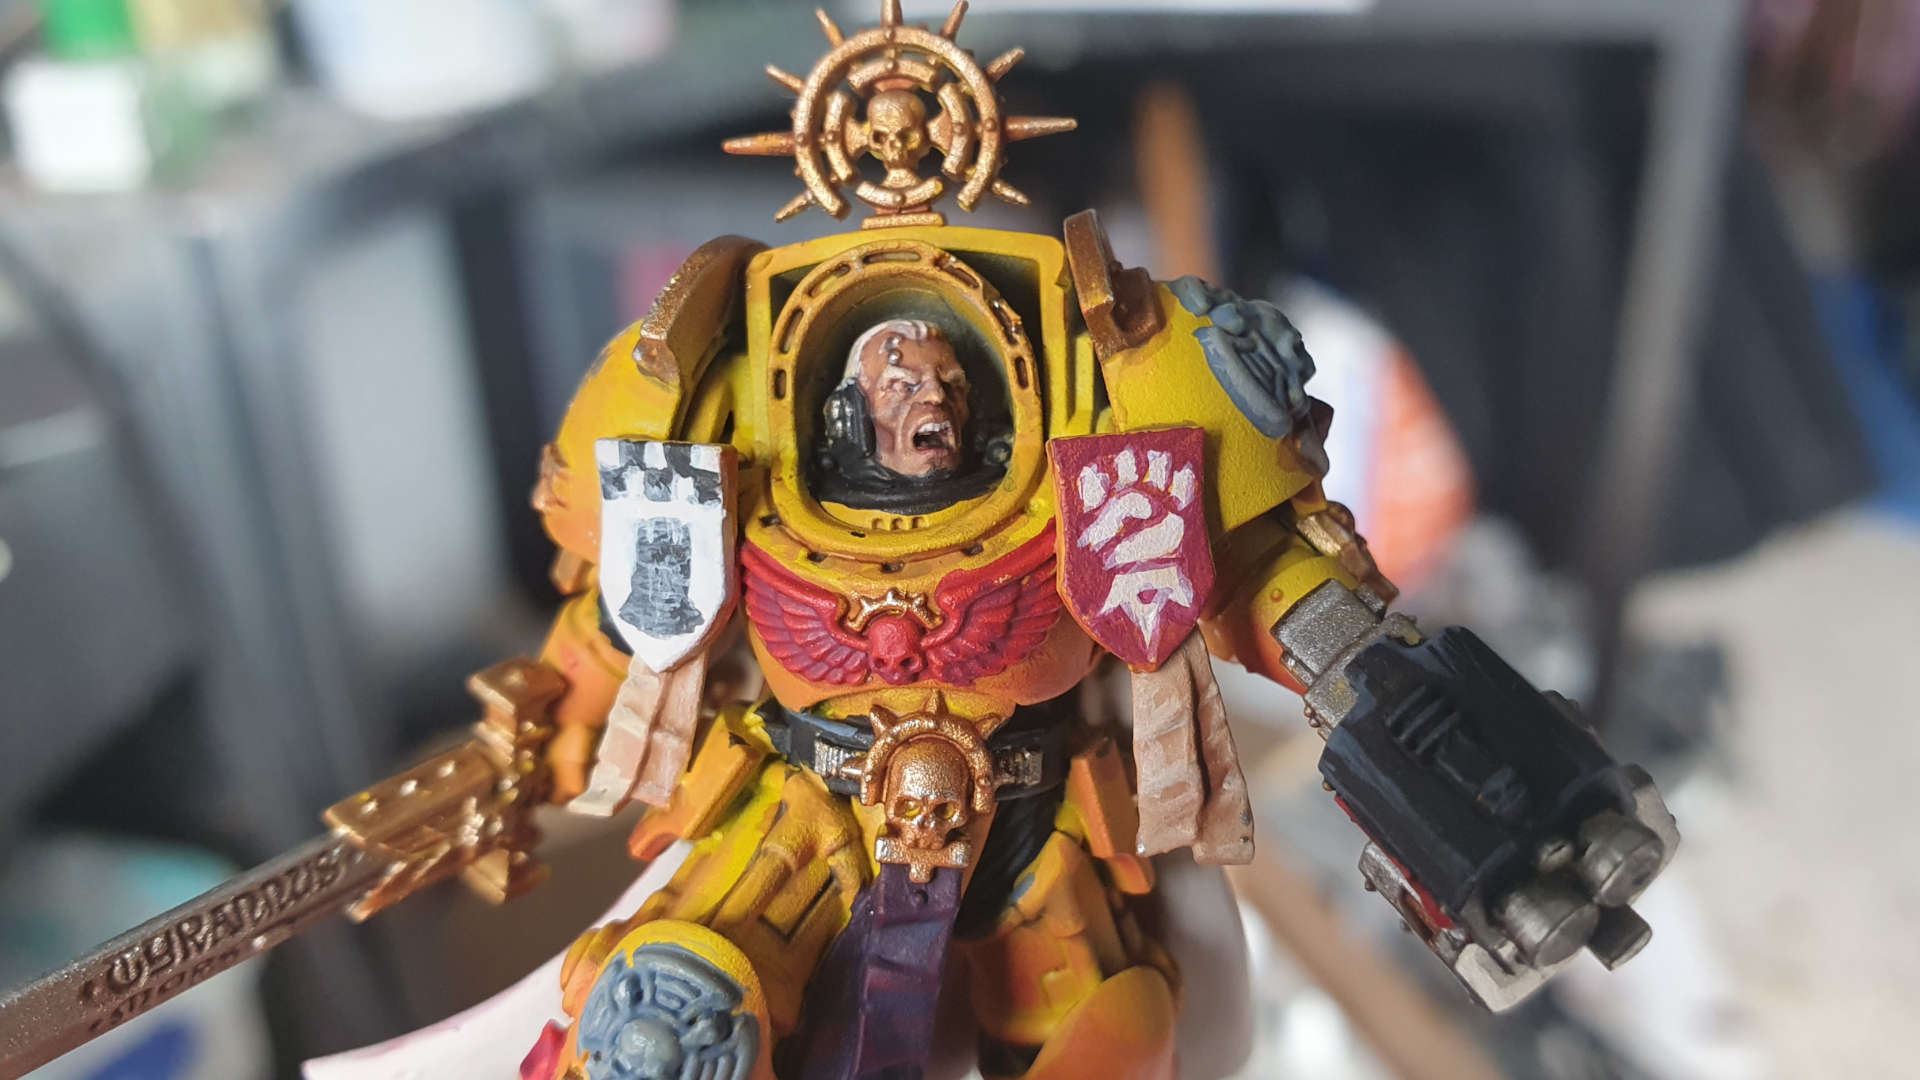 Review: Warhammer 40.000 Leviathan » Tale of Painters